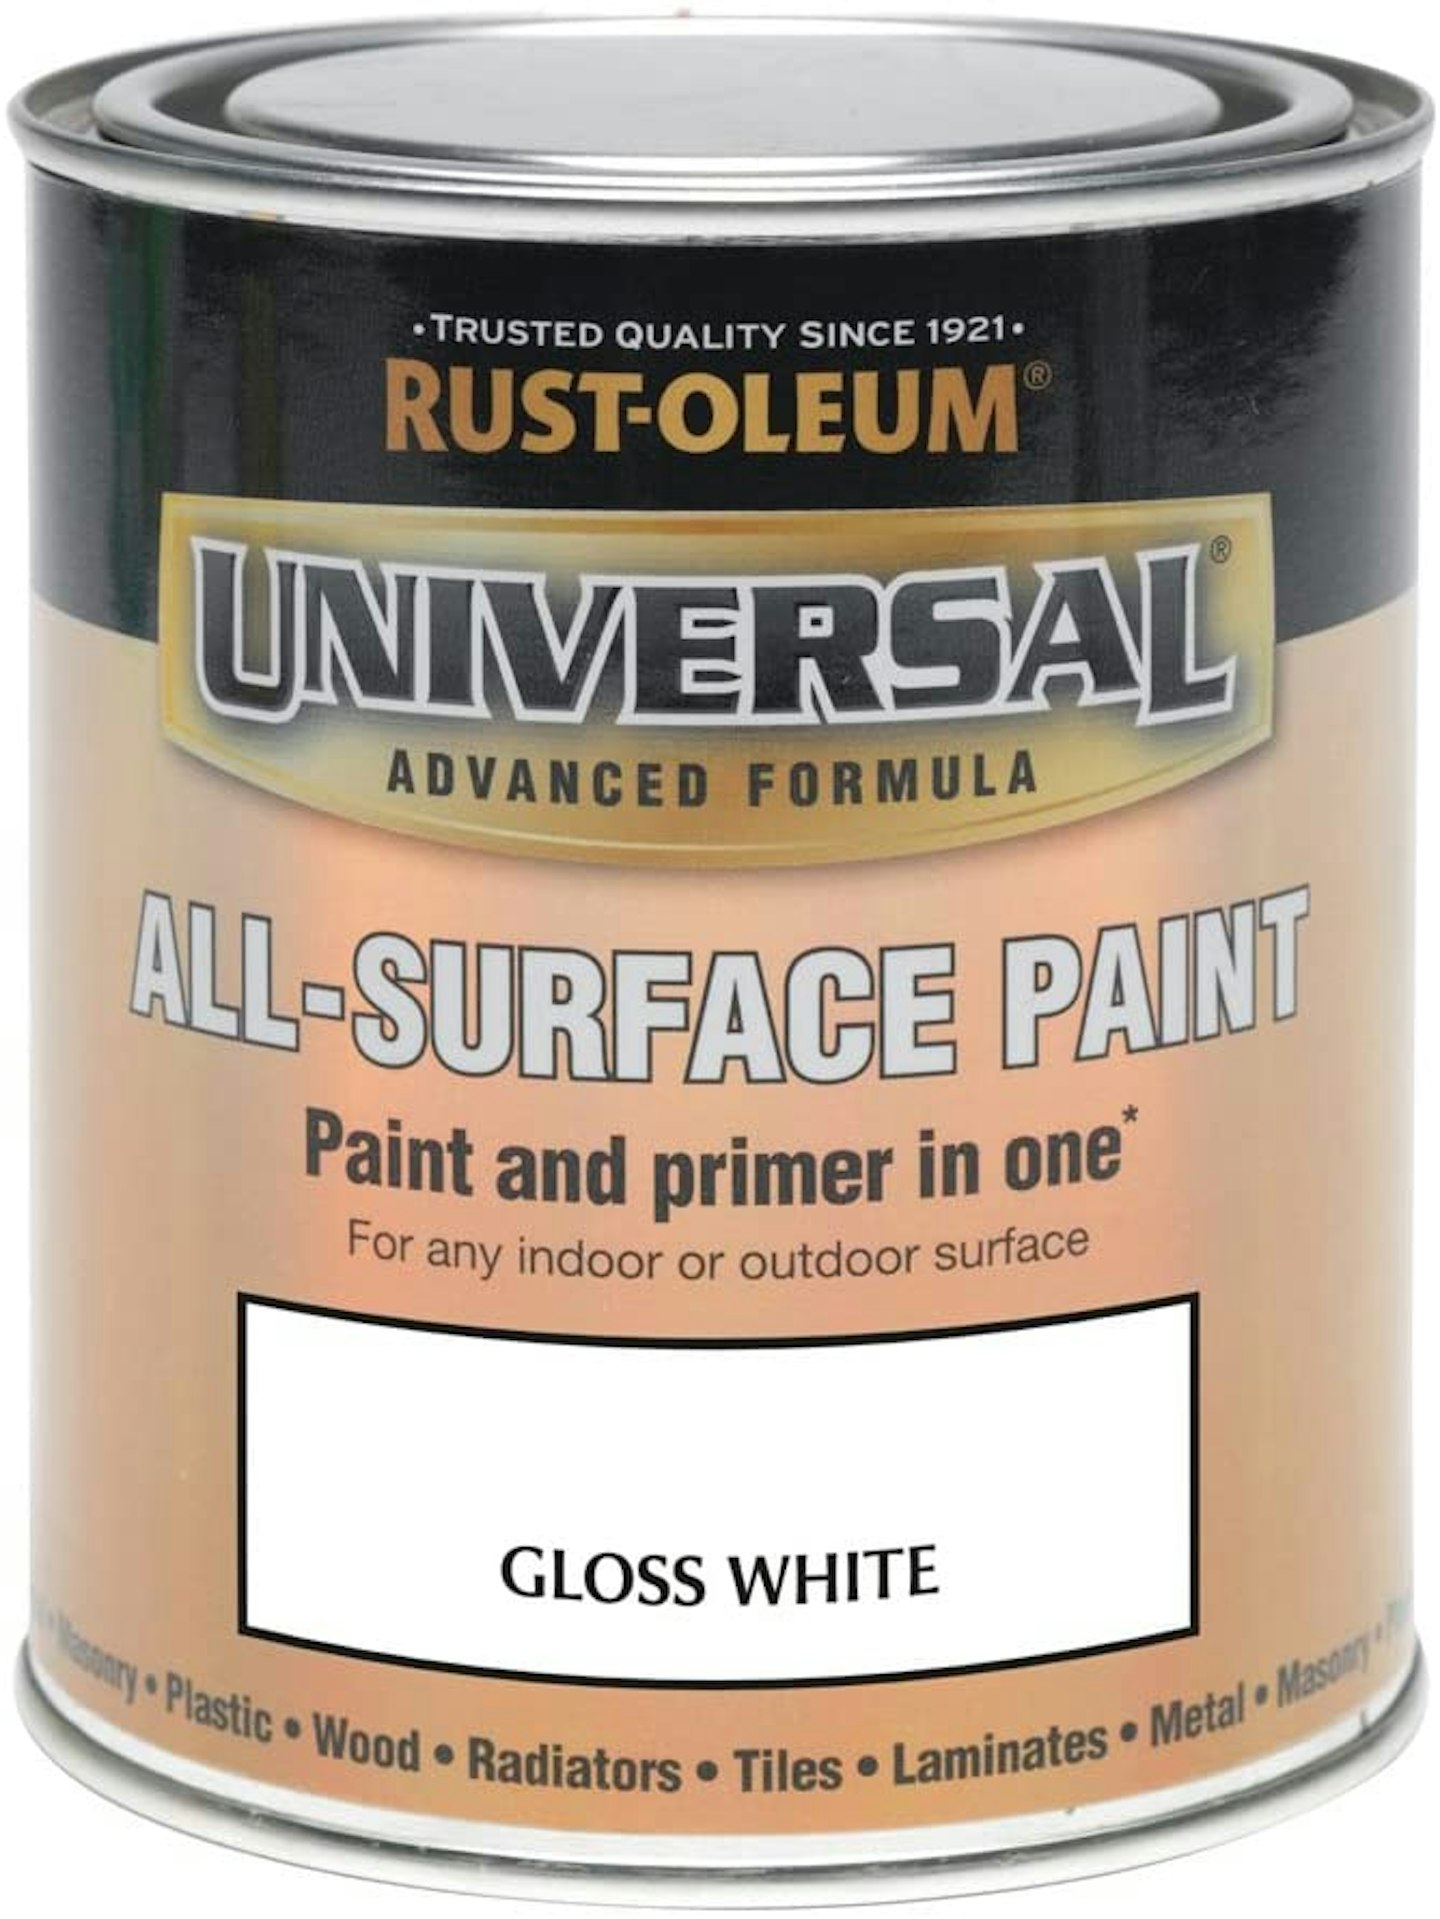 A tin can of Rust-Oleum universal paint